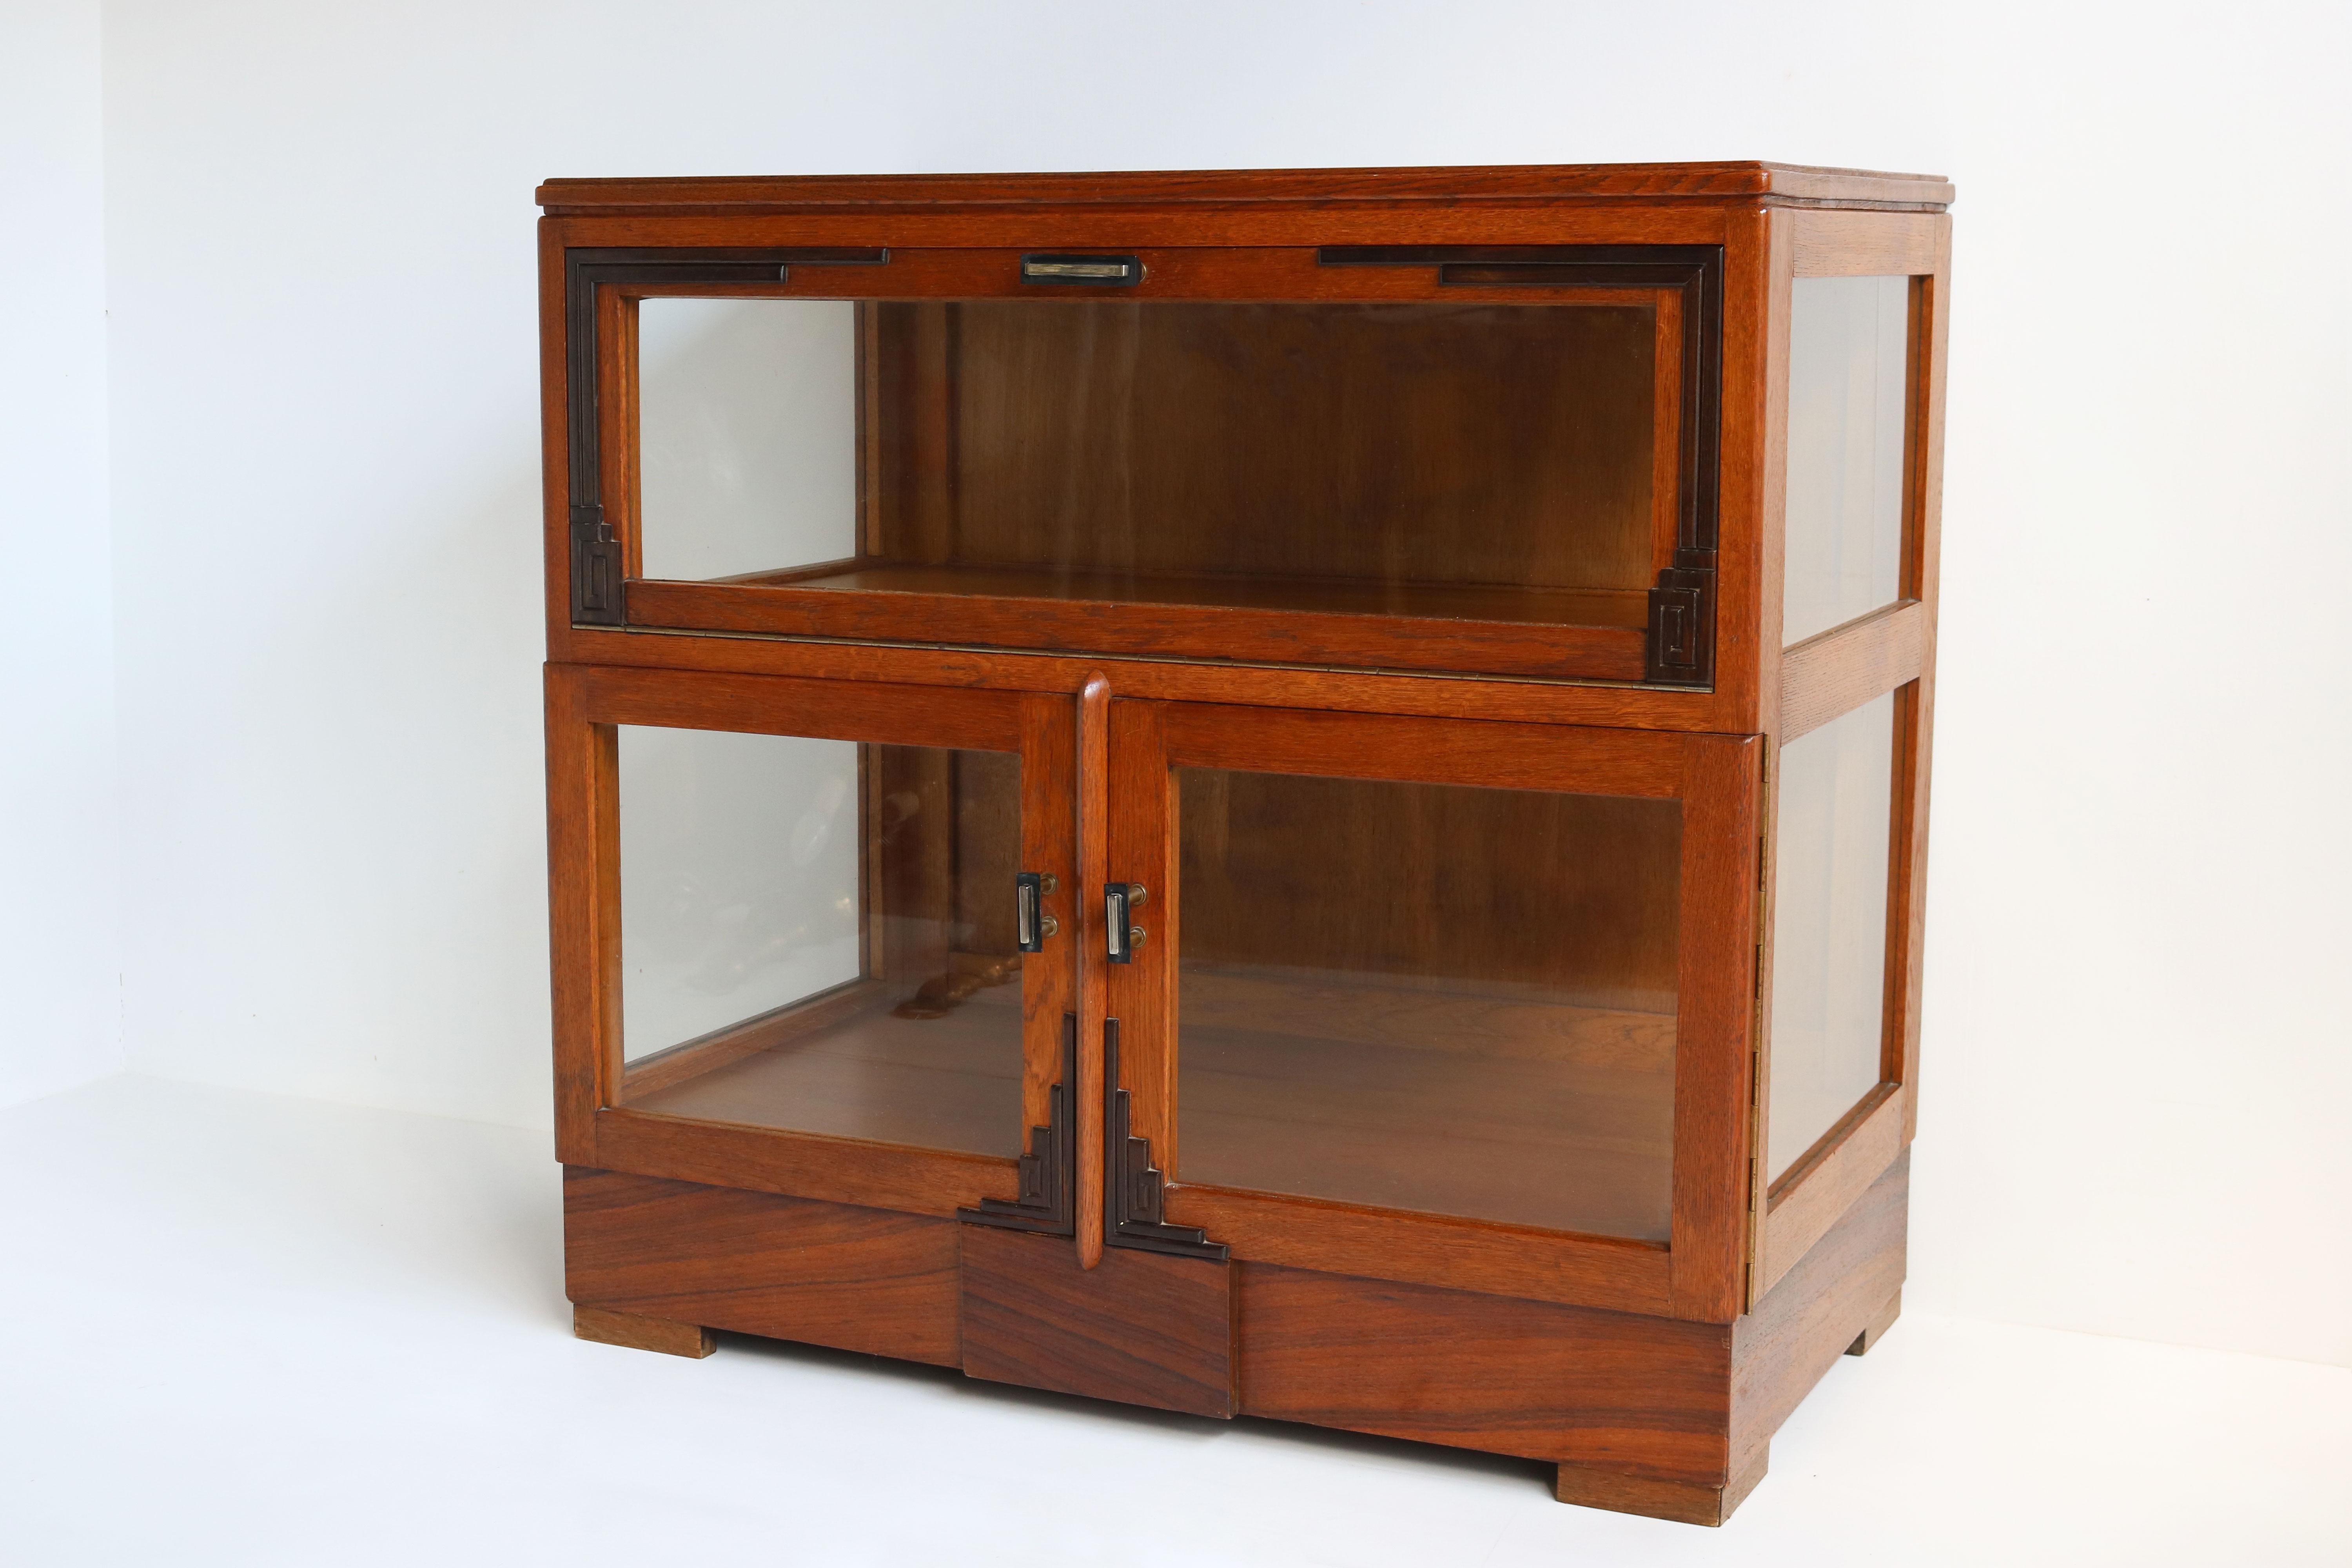 Gorgeous Dutch antique Amsterdam School style tea cabinet. Striking Dutch Art Deco design from the 1920s . 
The blonde oak looks amazing with the typical Amsterdam School Art Deco decorations in Macassar wood. 
The cabinet has glass on 3 sides.